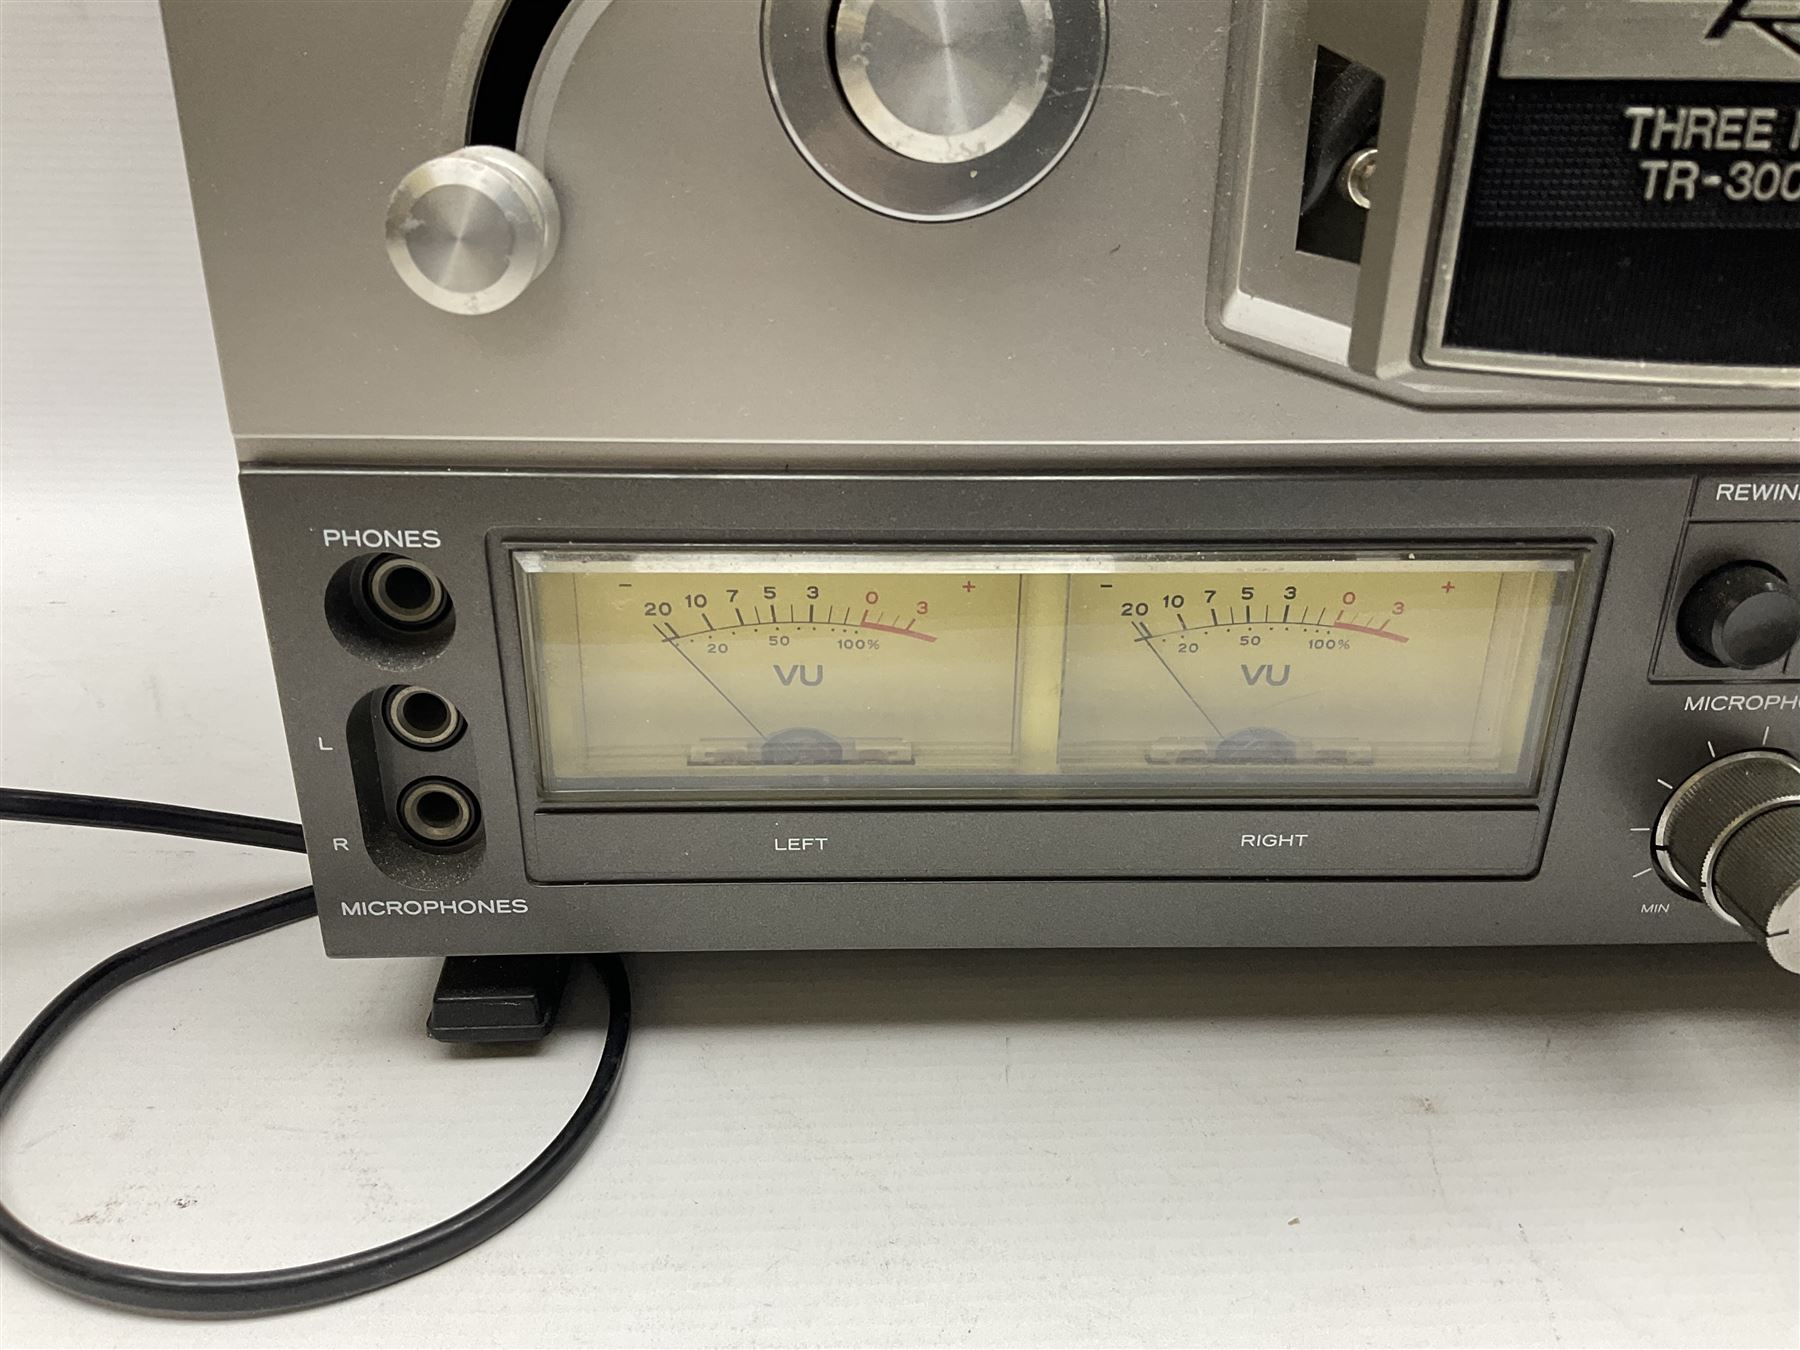 Realistic TR-3000 Logic Control stereo tape deck reel to reel HiFi - Image 11 of 17